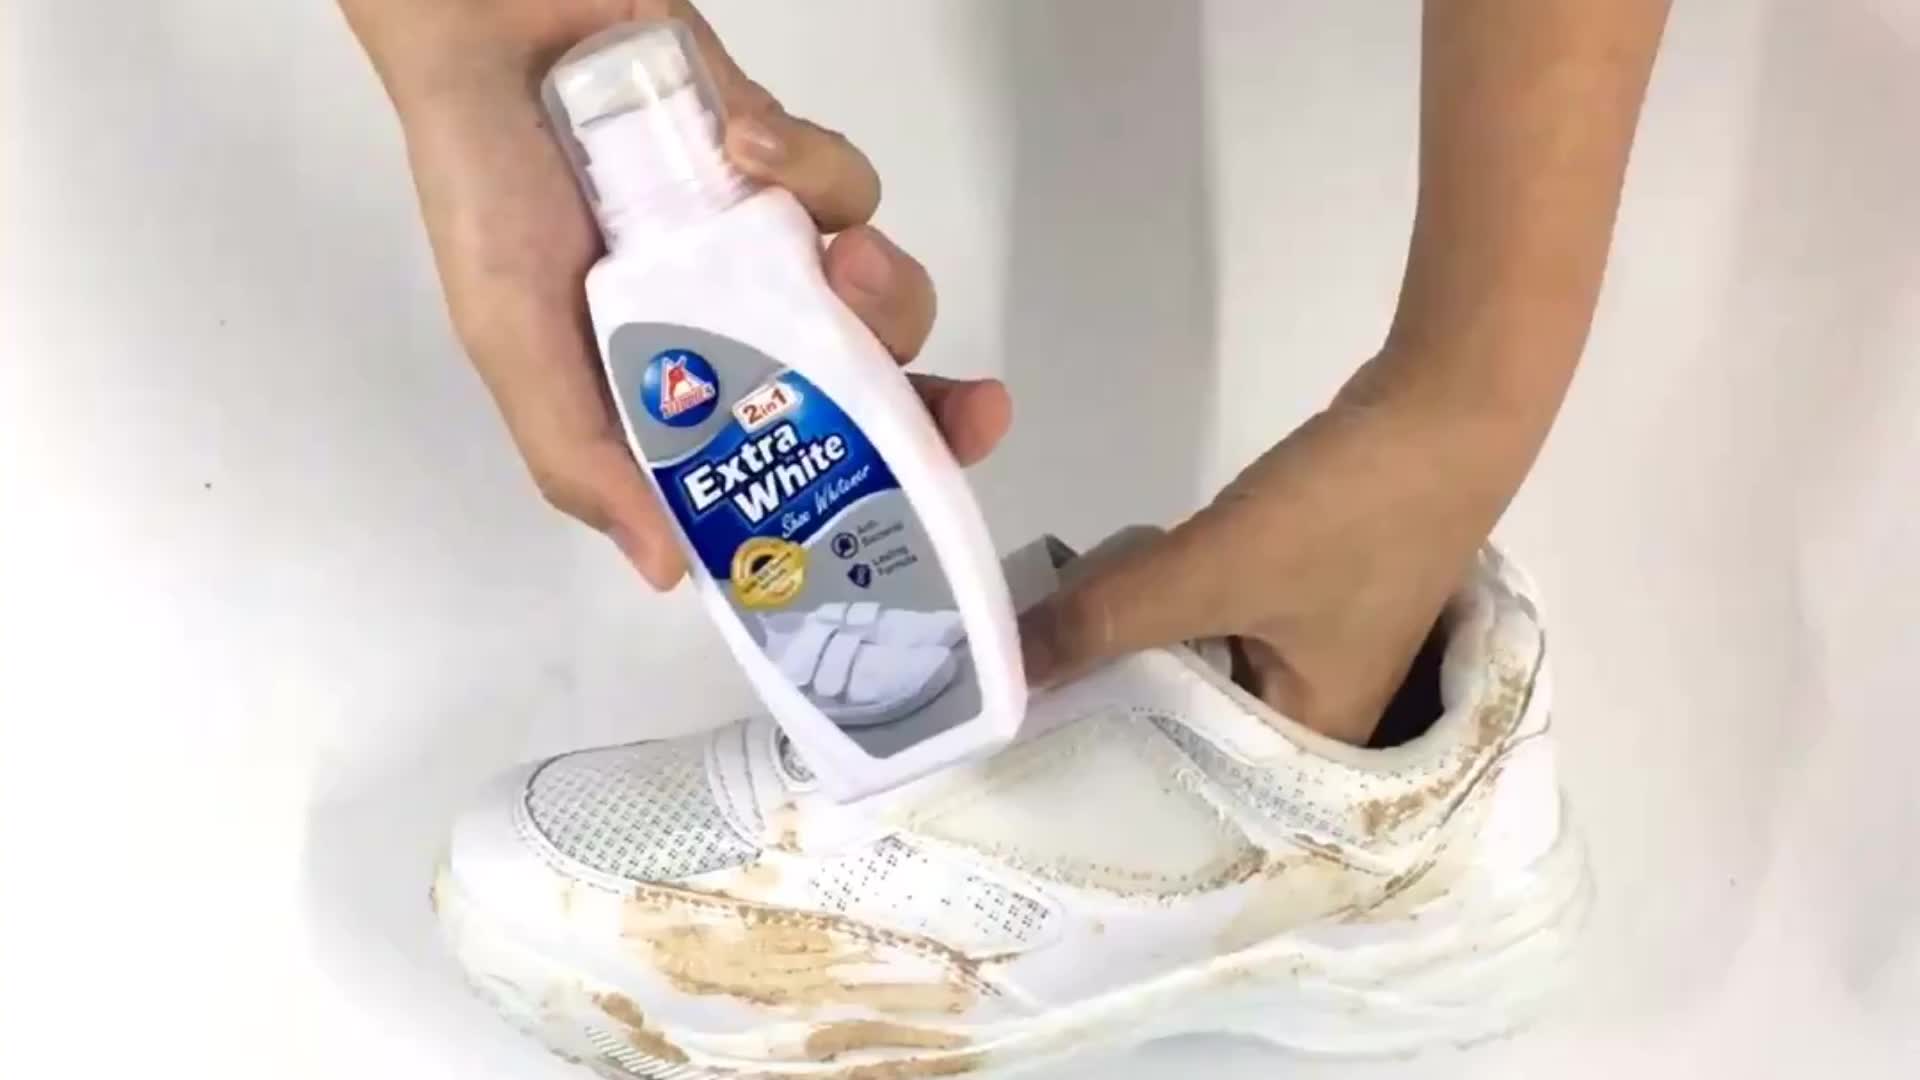 Remember when we only washed them on Sunday nights and they still didn't dry on time to avoid scolding the next day? Image taken from Alibaba.com